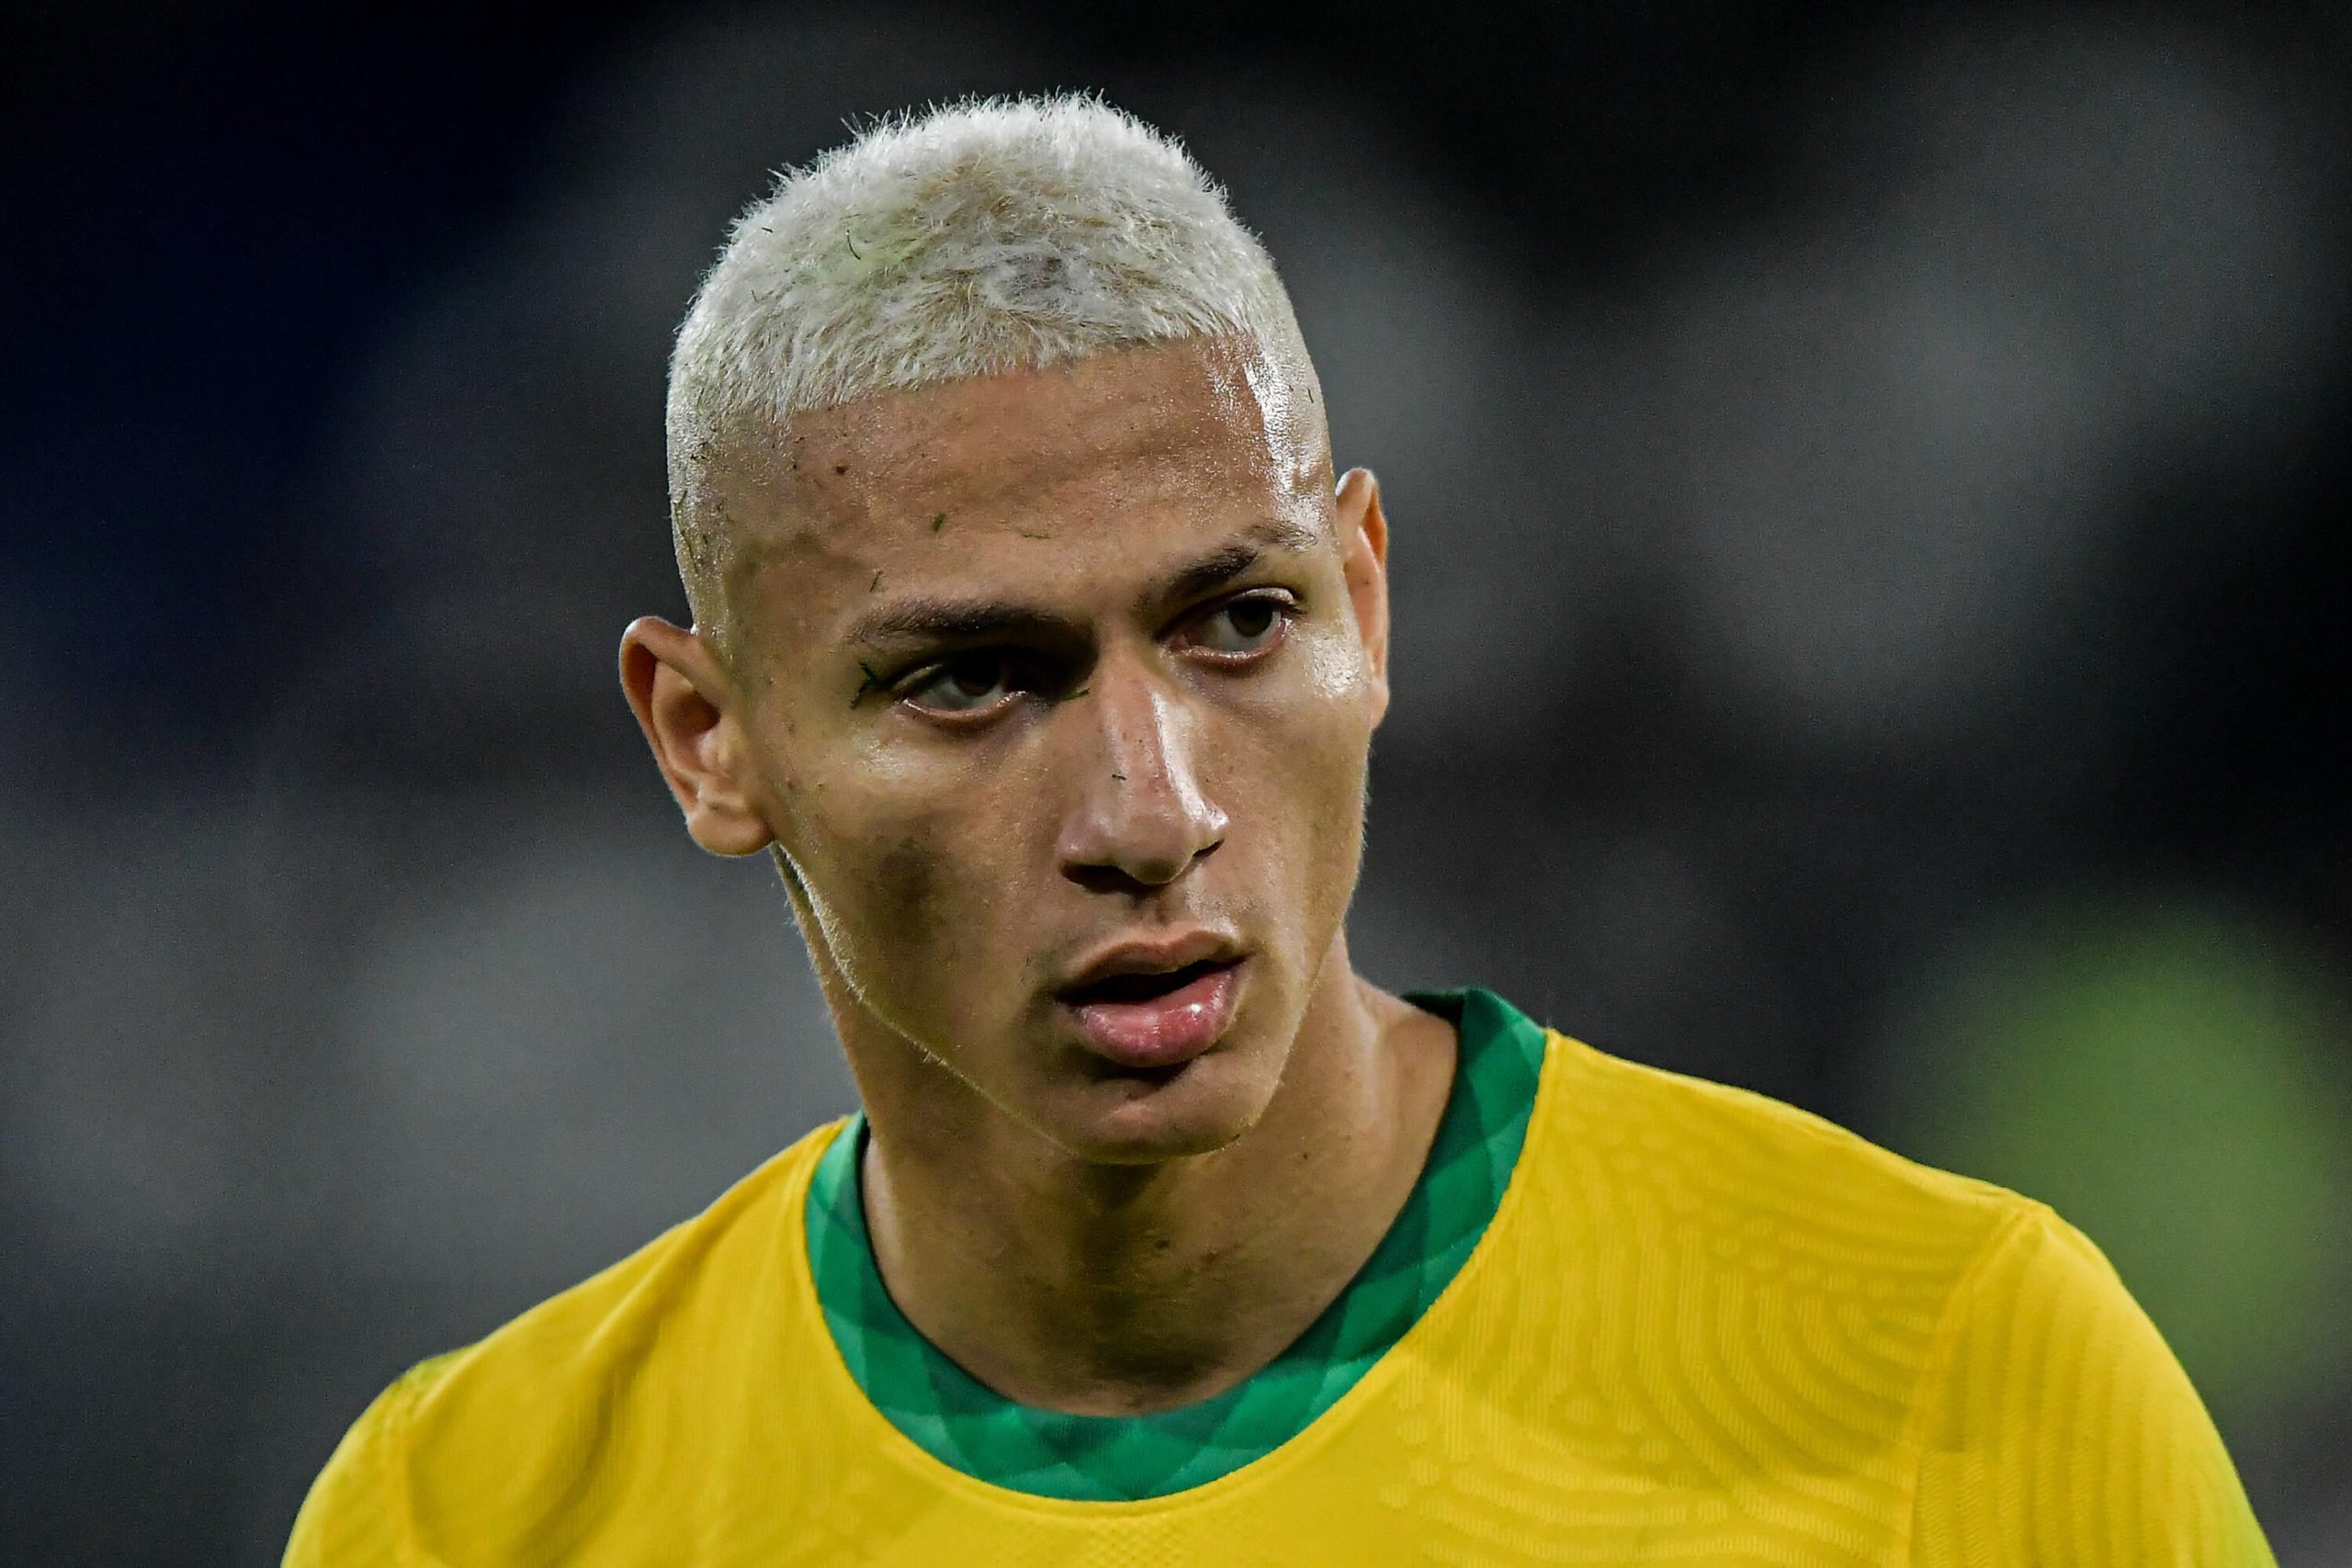 Everton's Richarlison gathering interest from Paris (Richarlison is seen in the picture)